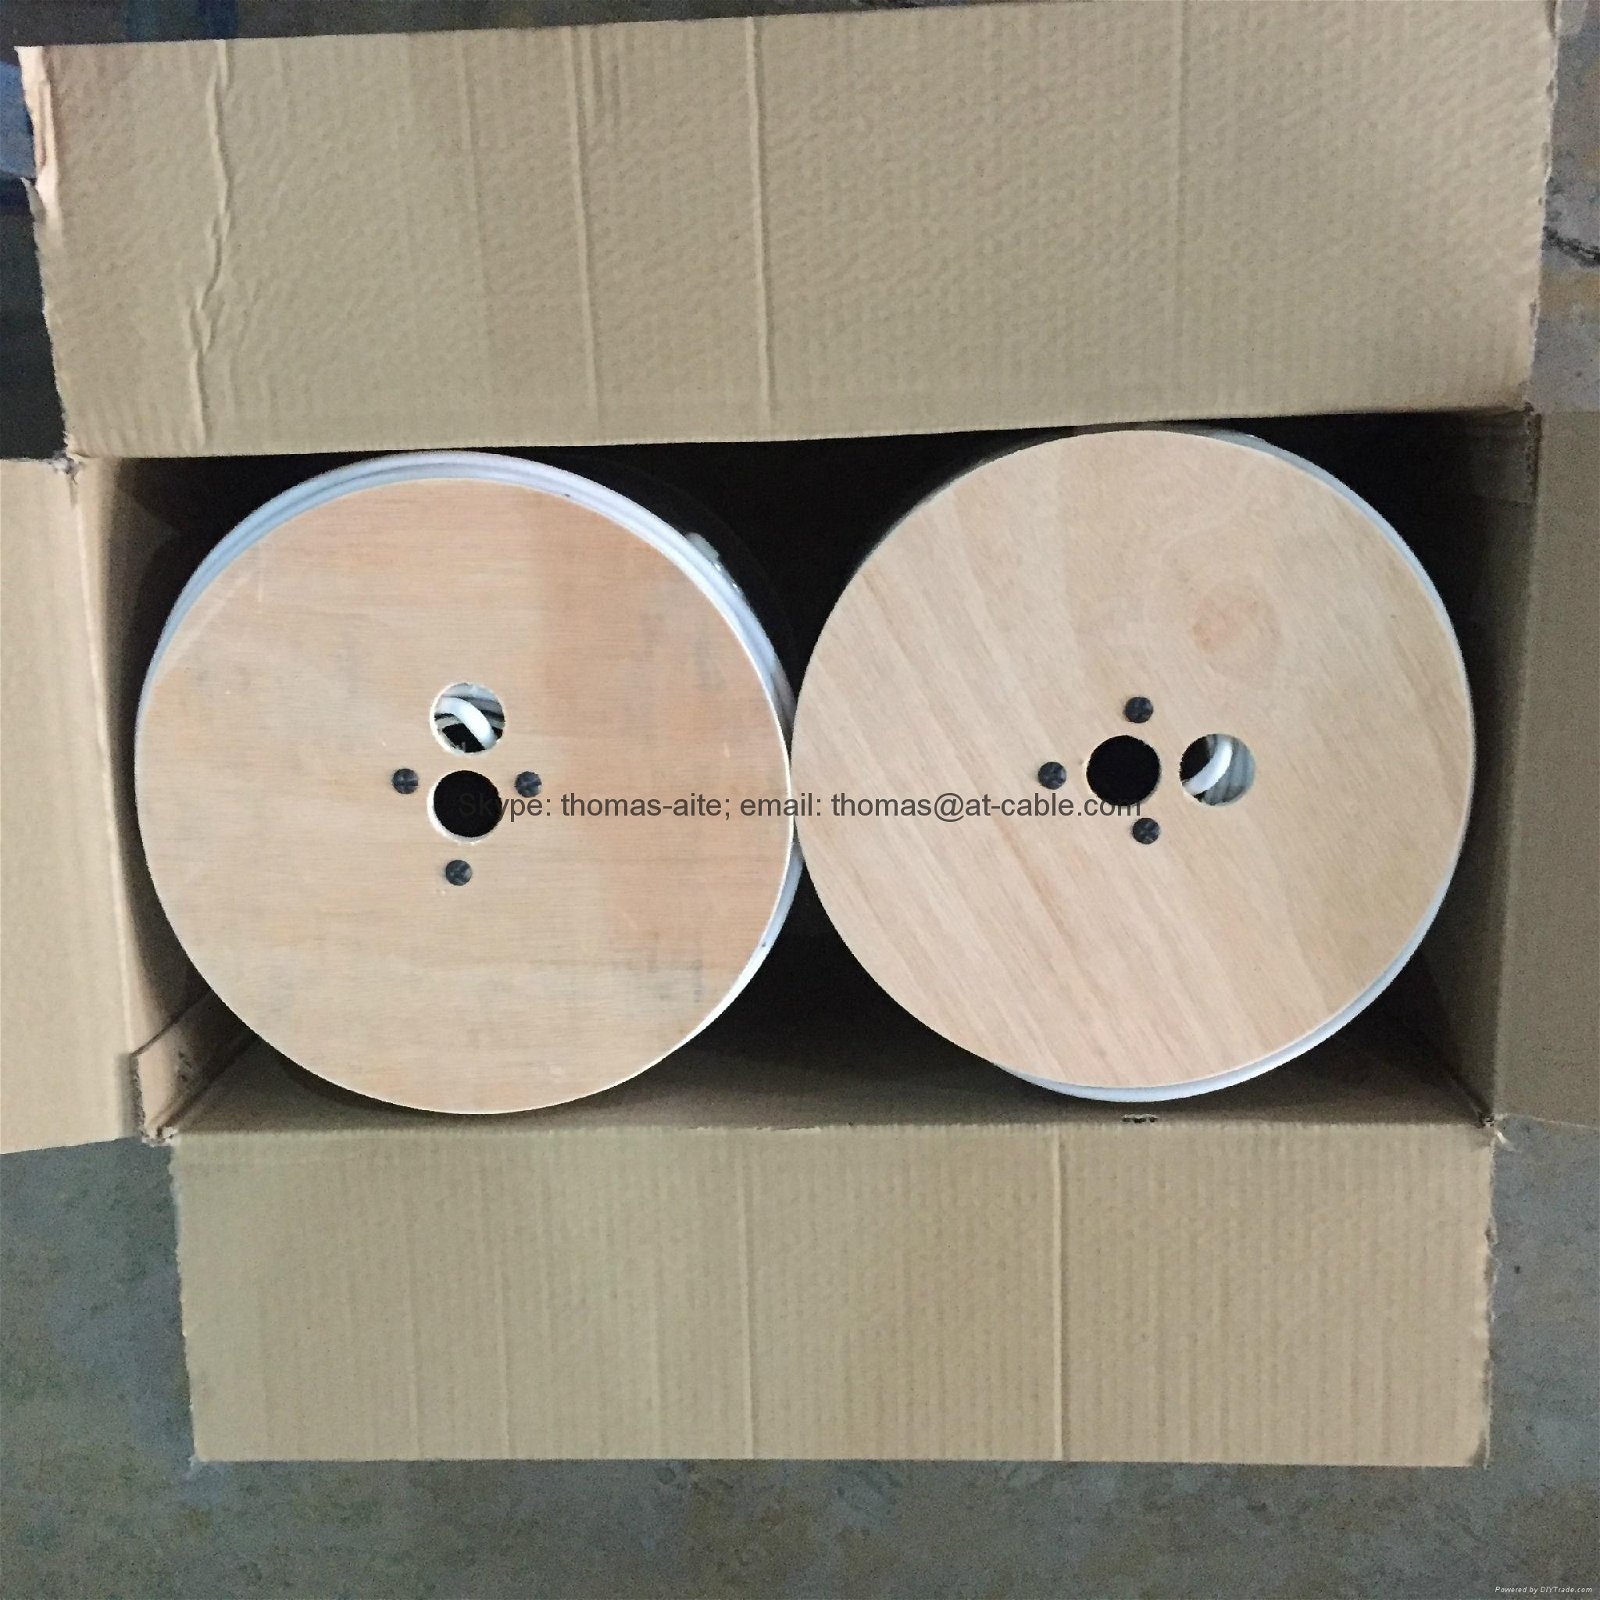 17/19/21 VATC Coaxial cable one carton two drum